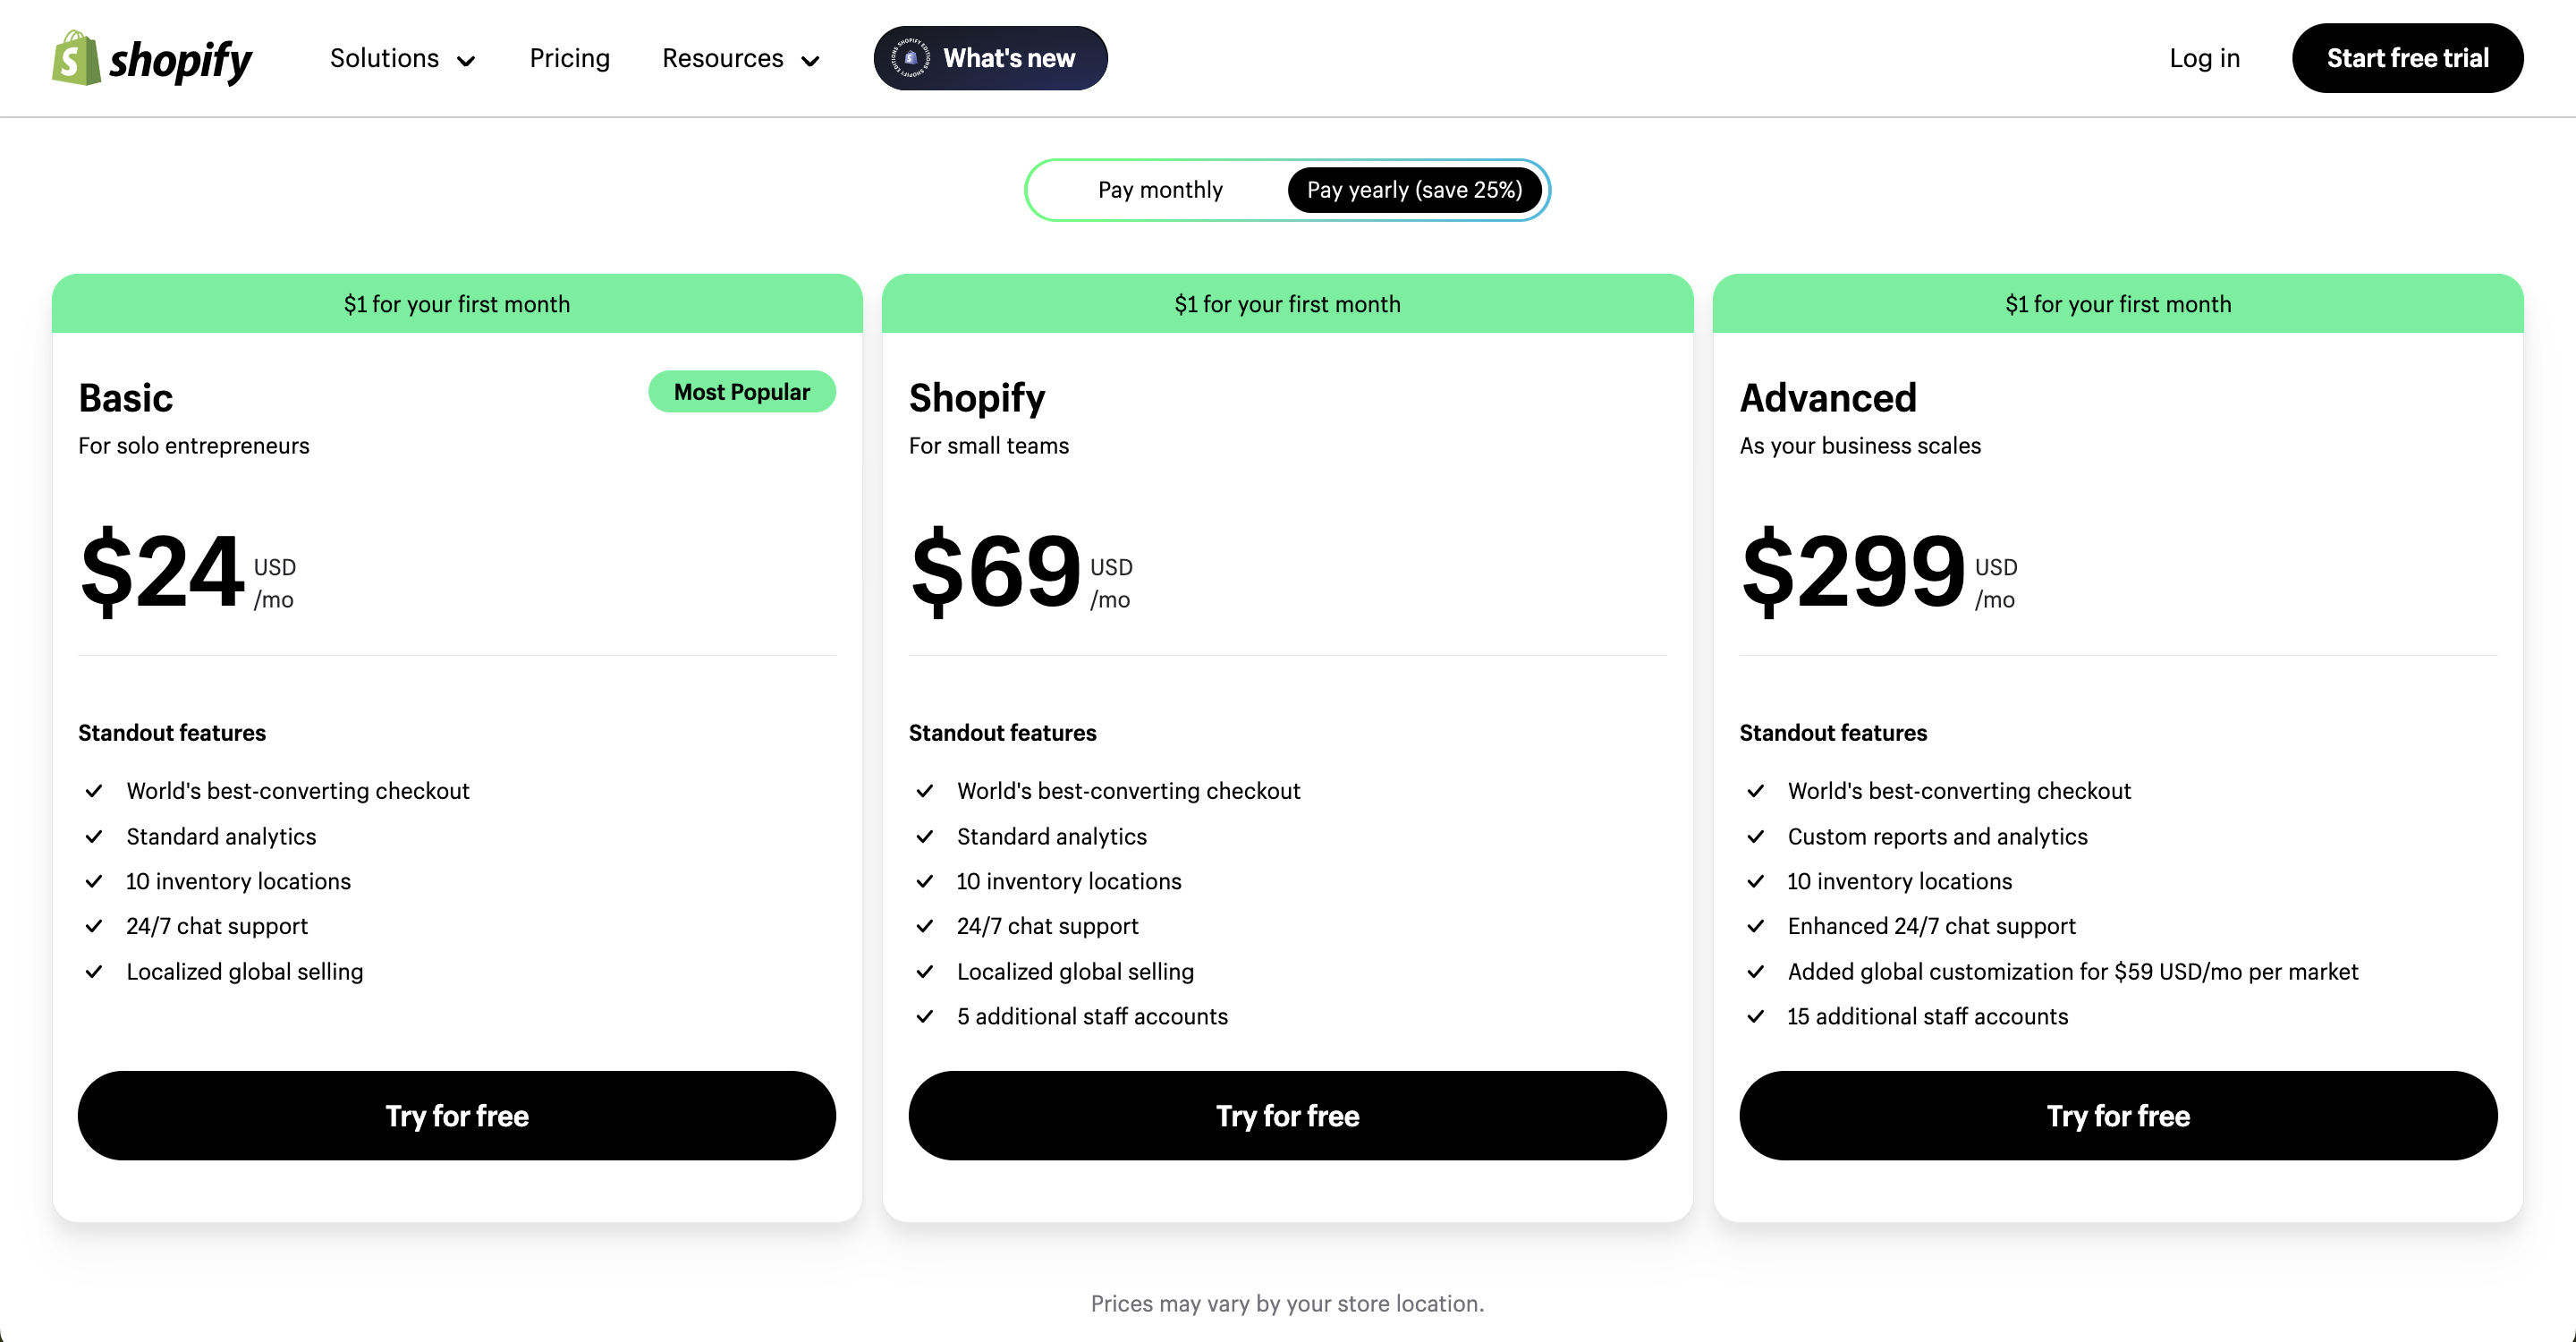 Shopify plans overview from Shopify’s official website